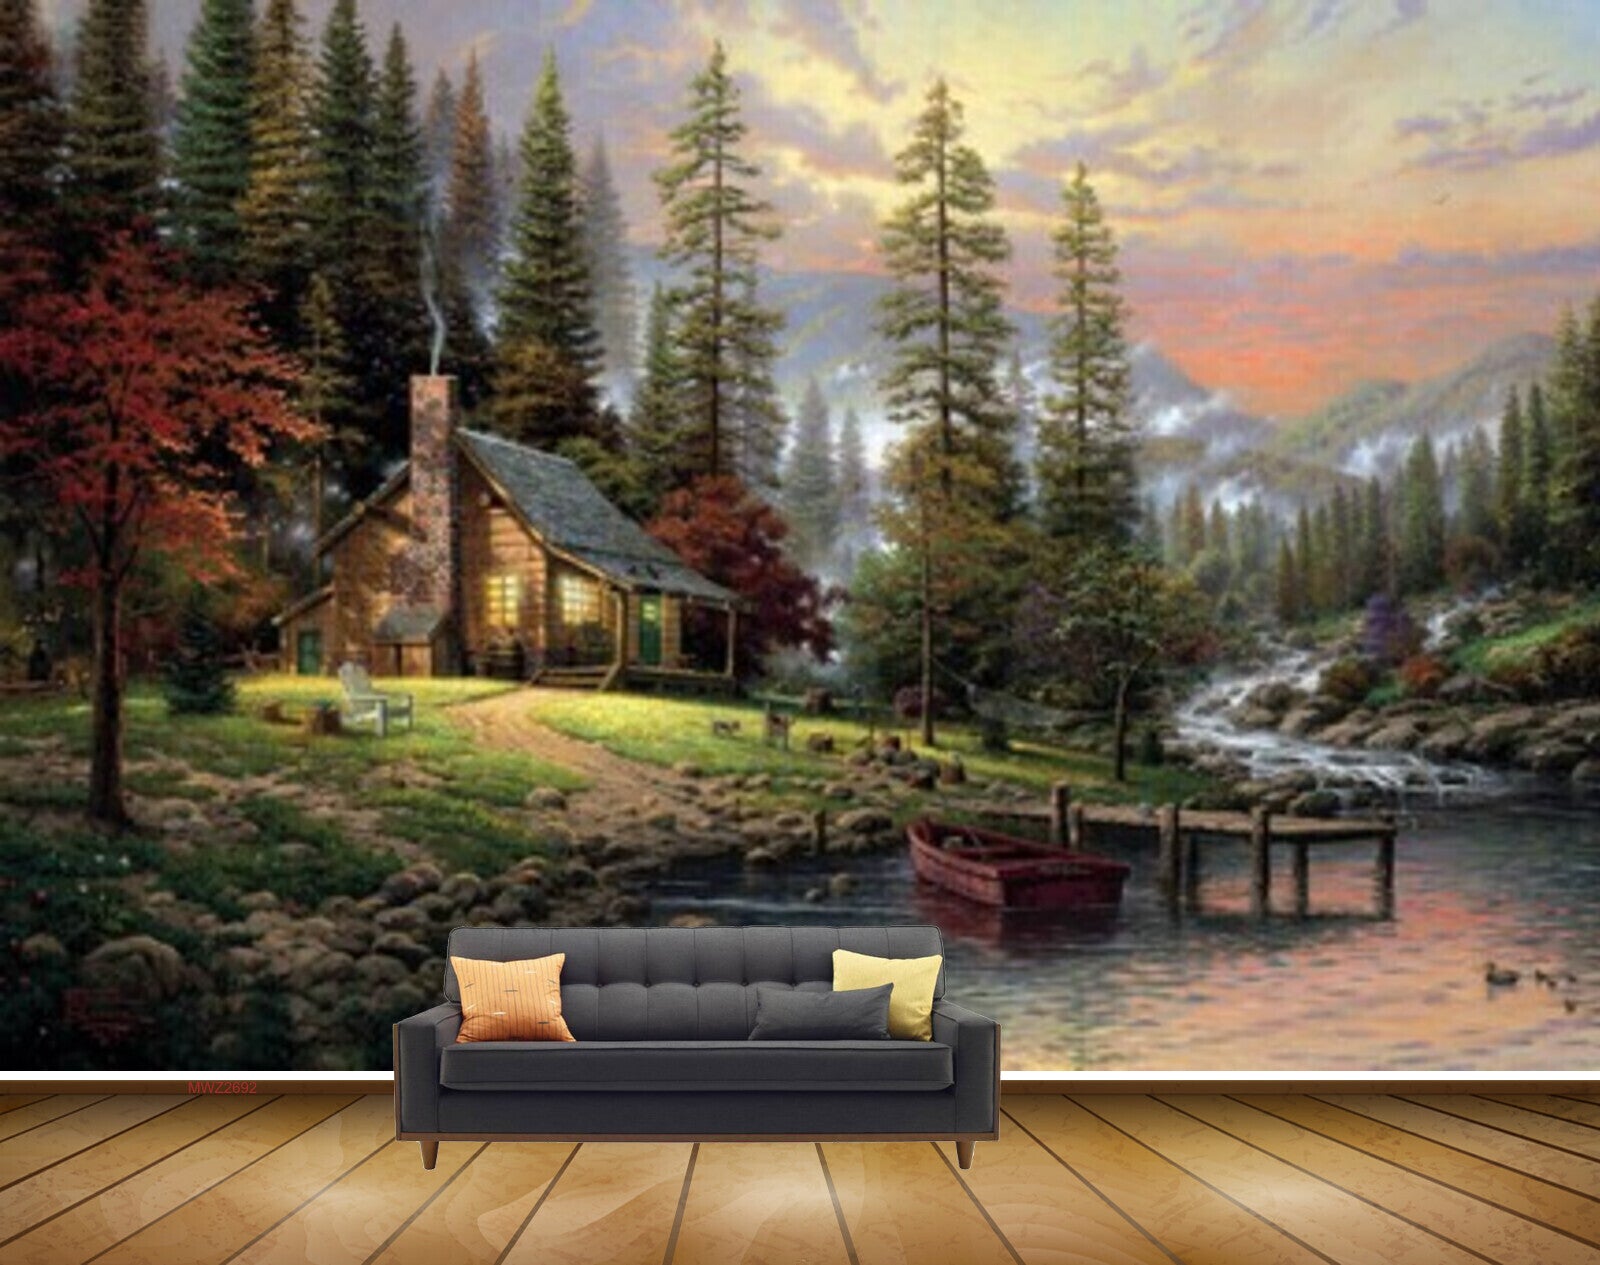 Avikalp MWZ2692 Trees Mountains Pond Çlouds Waterfalls Water Boat Wooden Ducks Stones House Chair Painting HD Wallpaper